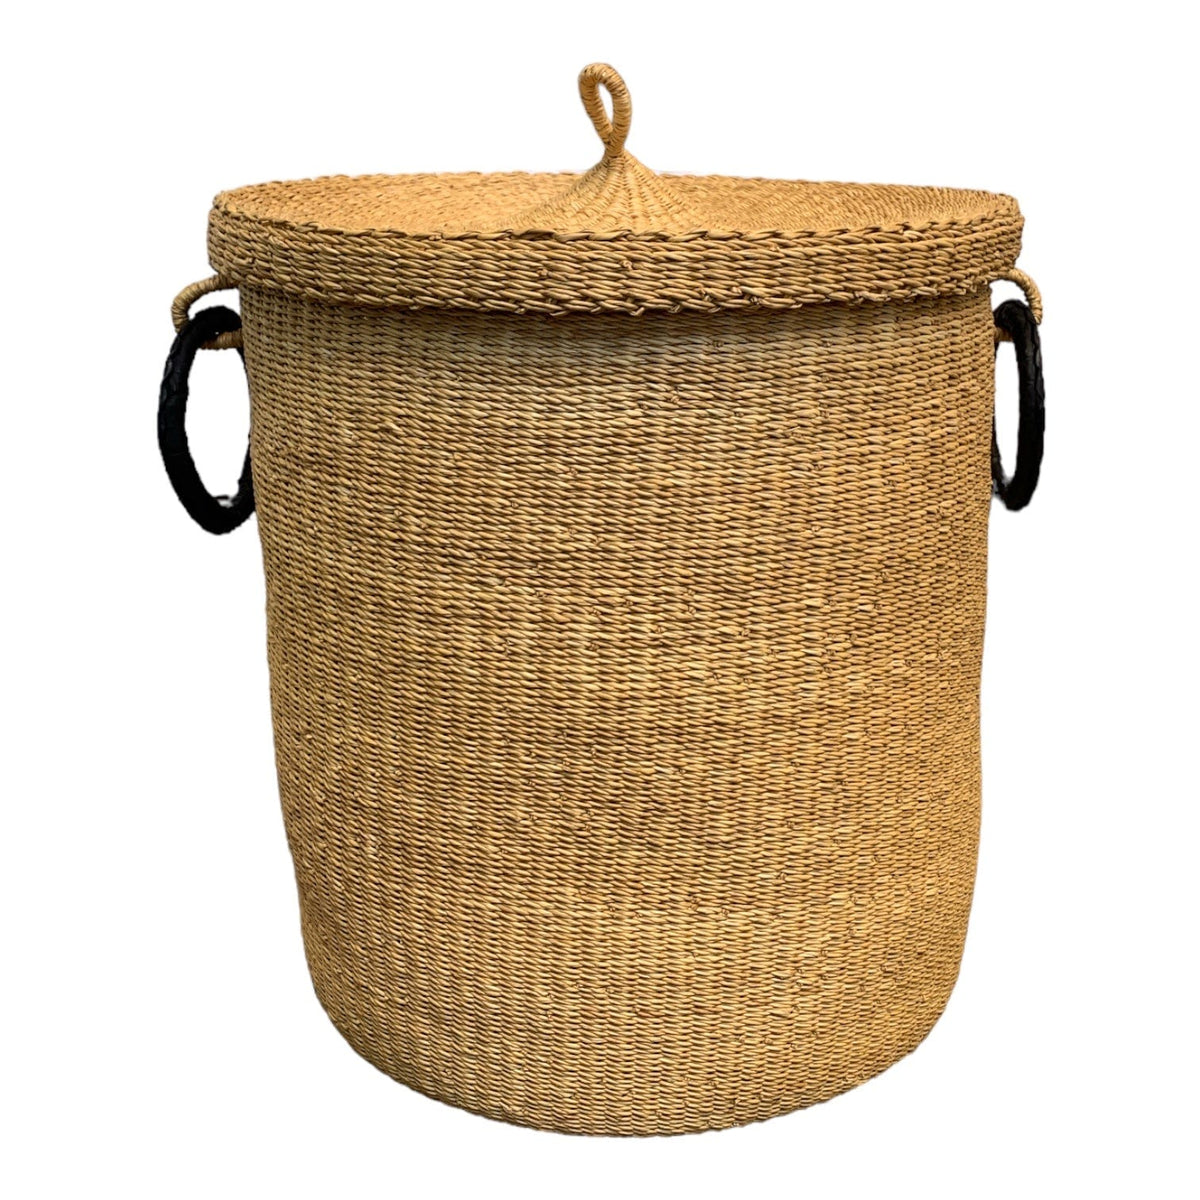 Woven-Natural-Large-Basket-with-Lid Little & Fox